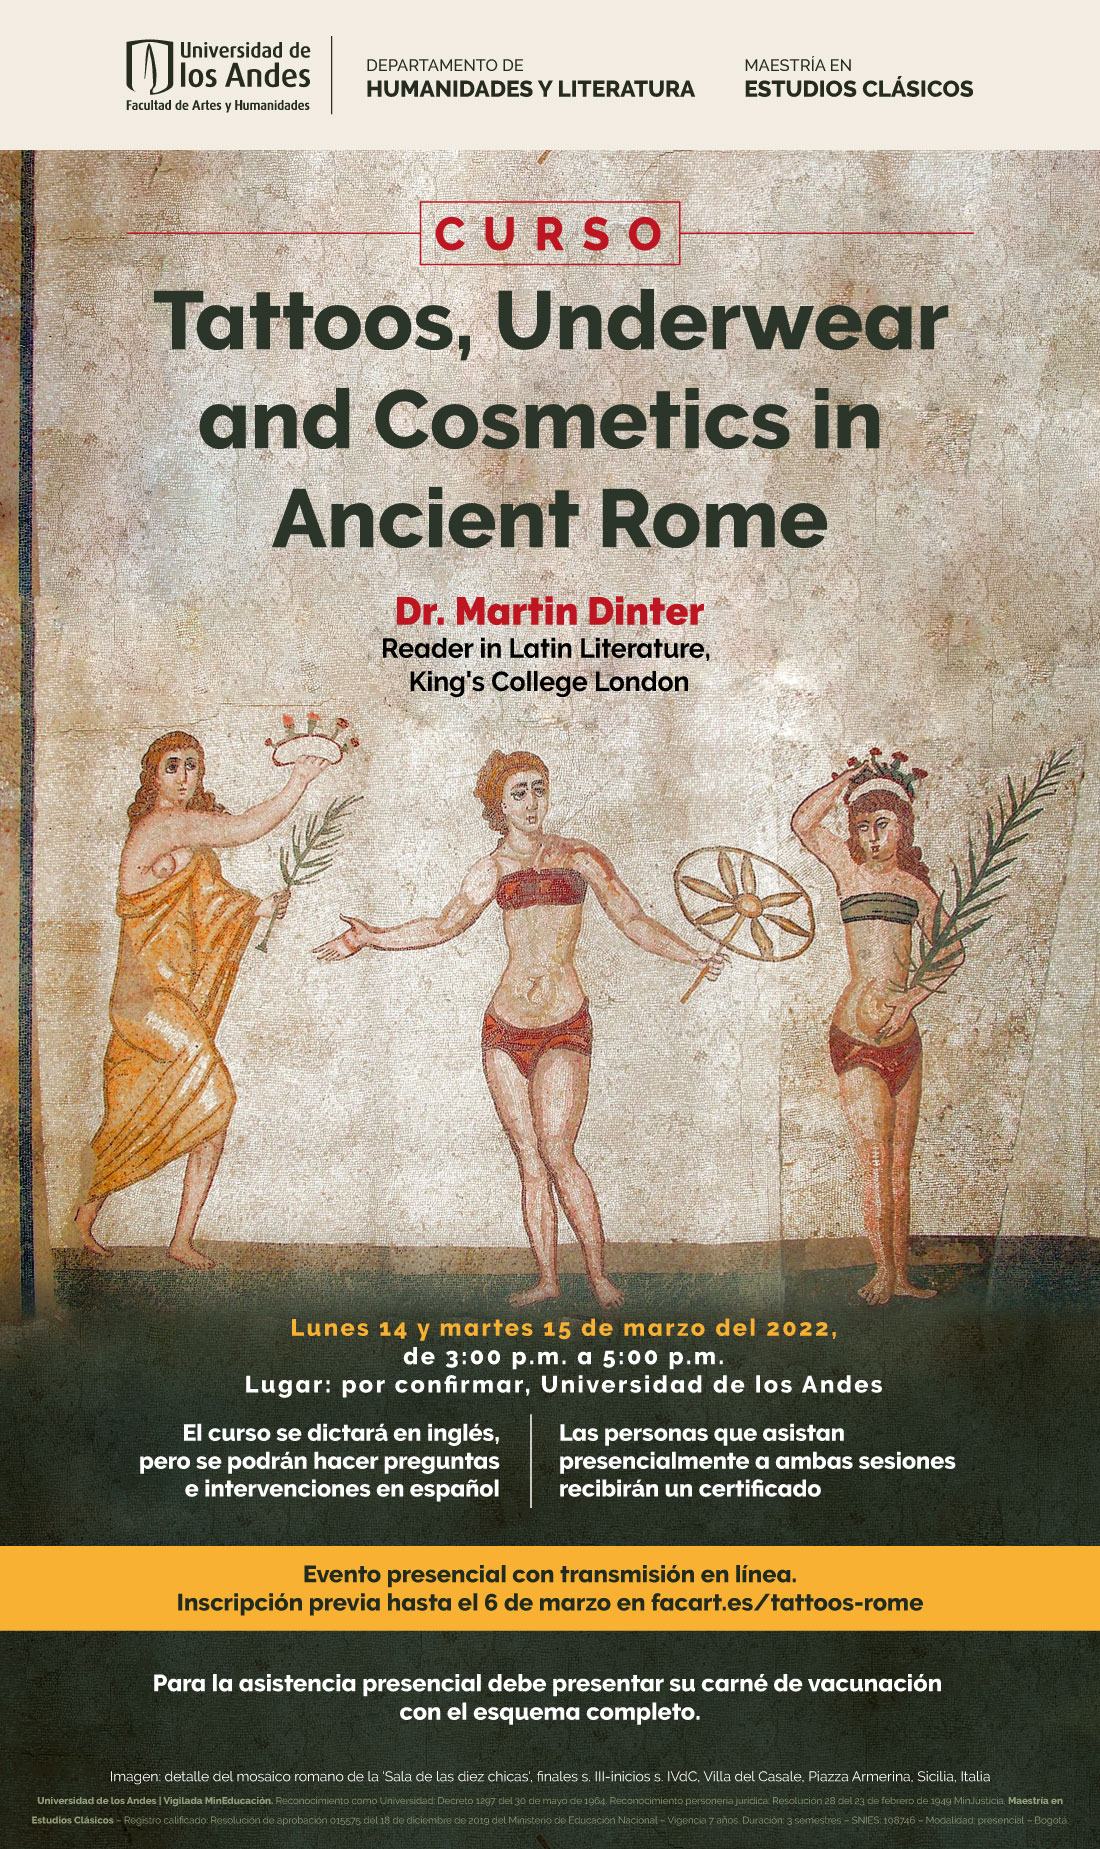 Tattoos, Underwear, Drugs and Cosmetics in Ancient Rome